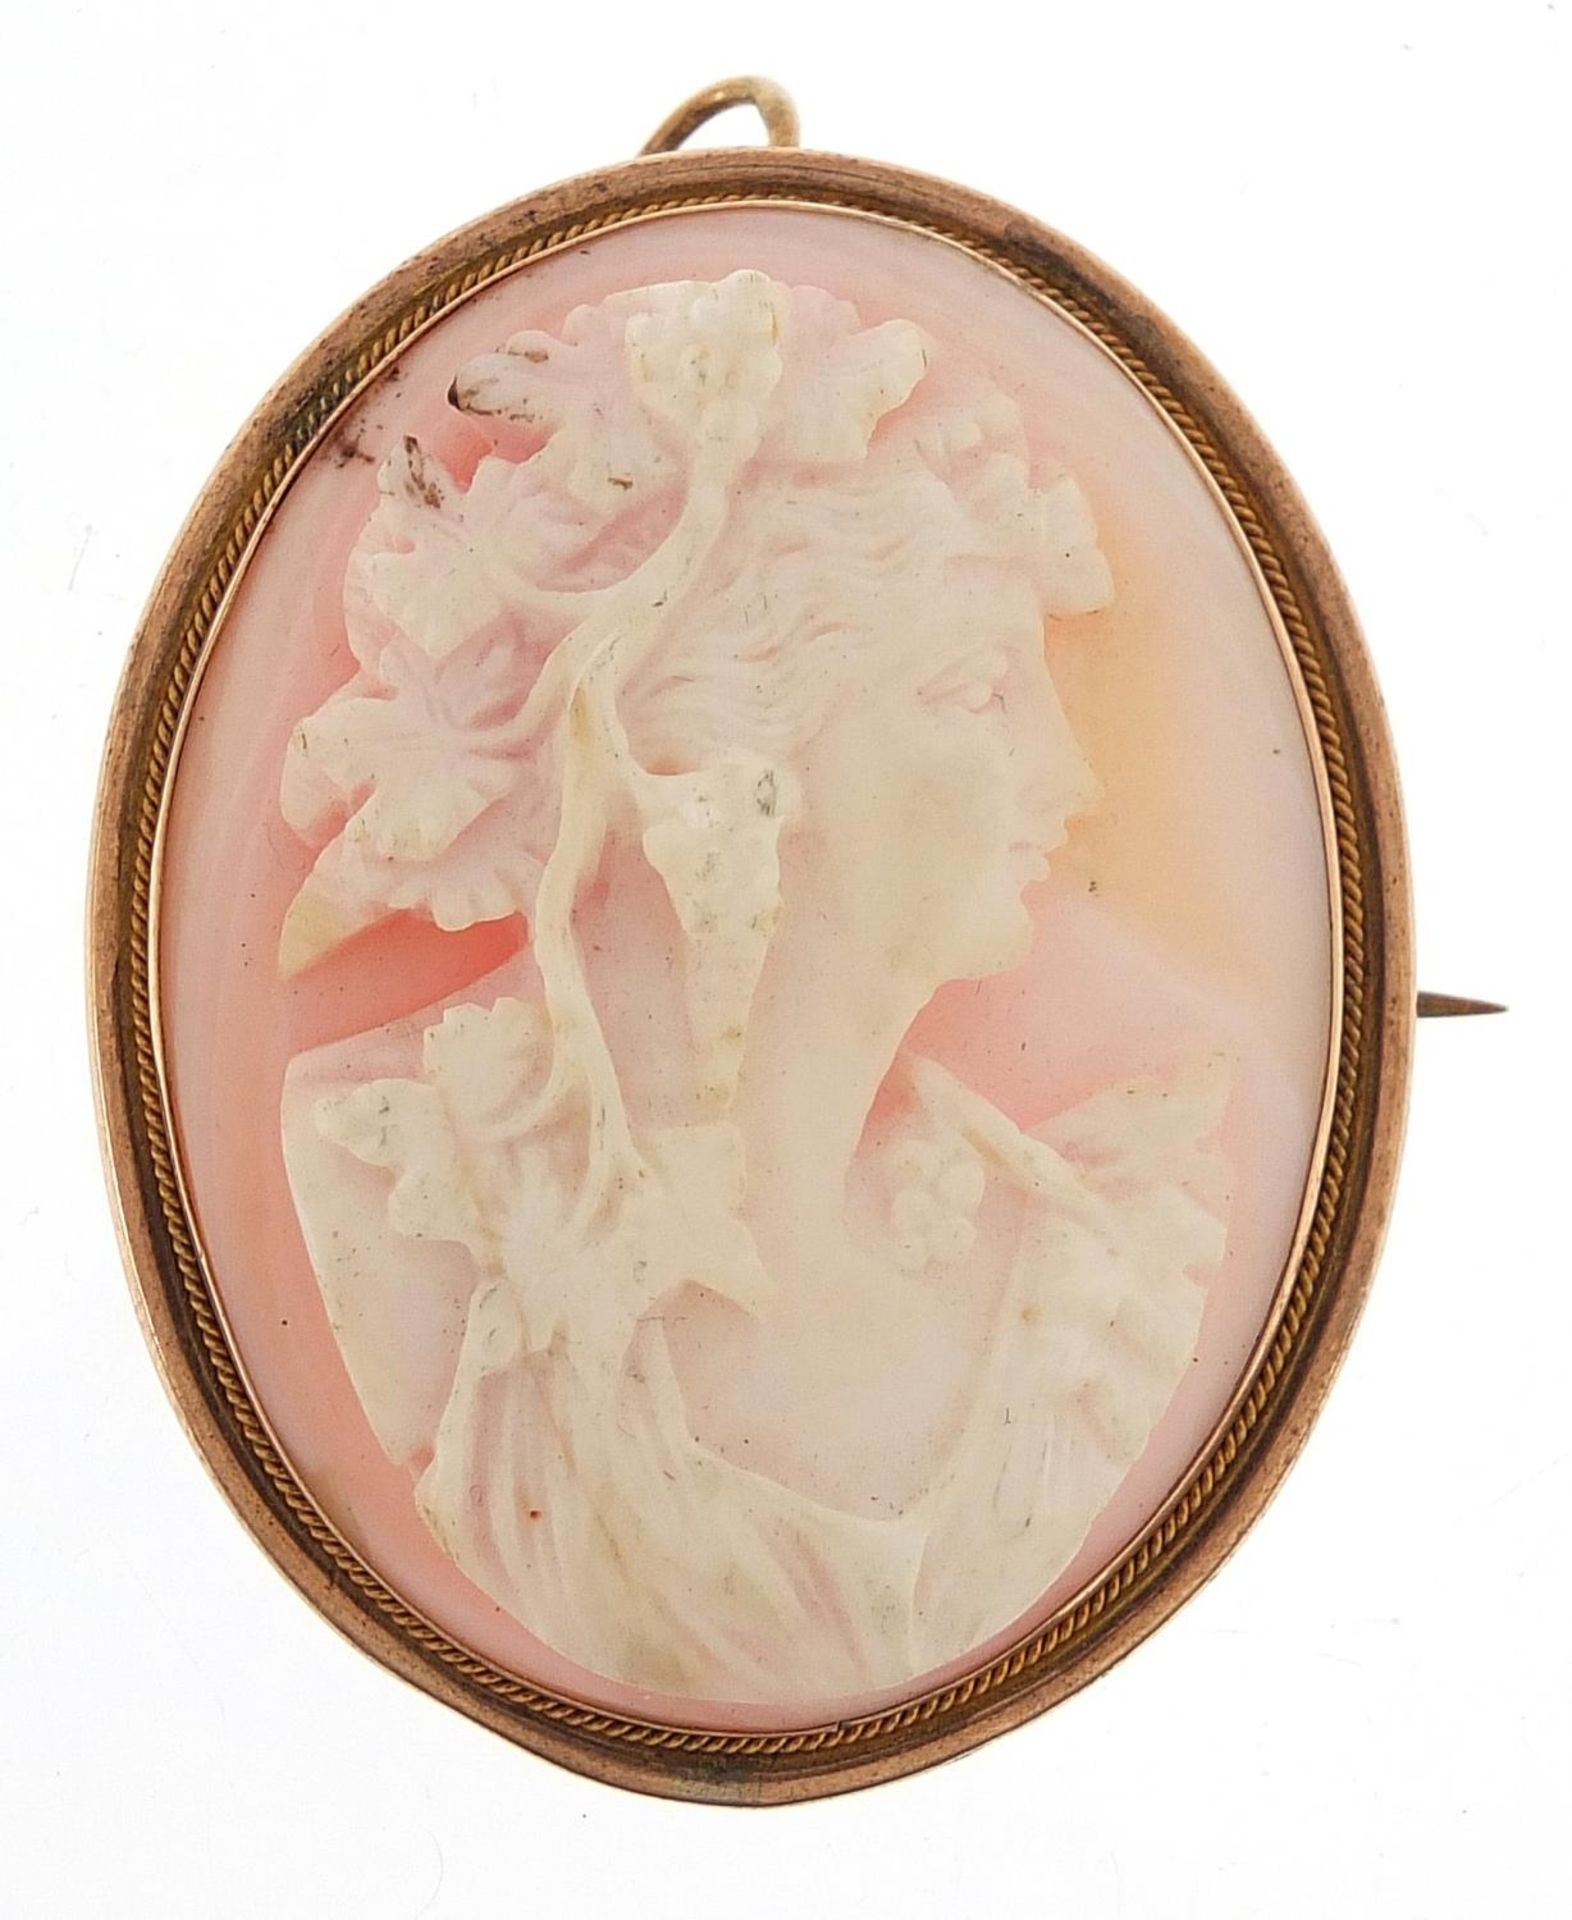 Unmarked gold cameo maiden head brooch pendant, 5.2cm high, 20.0g